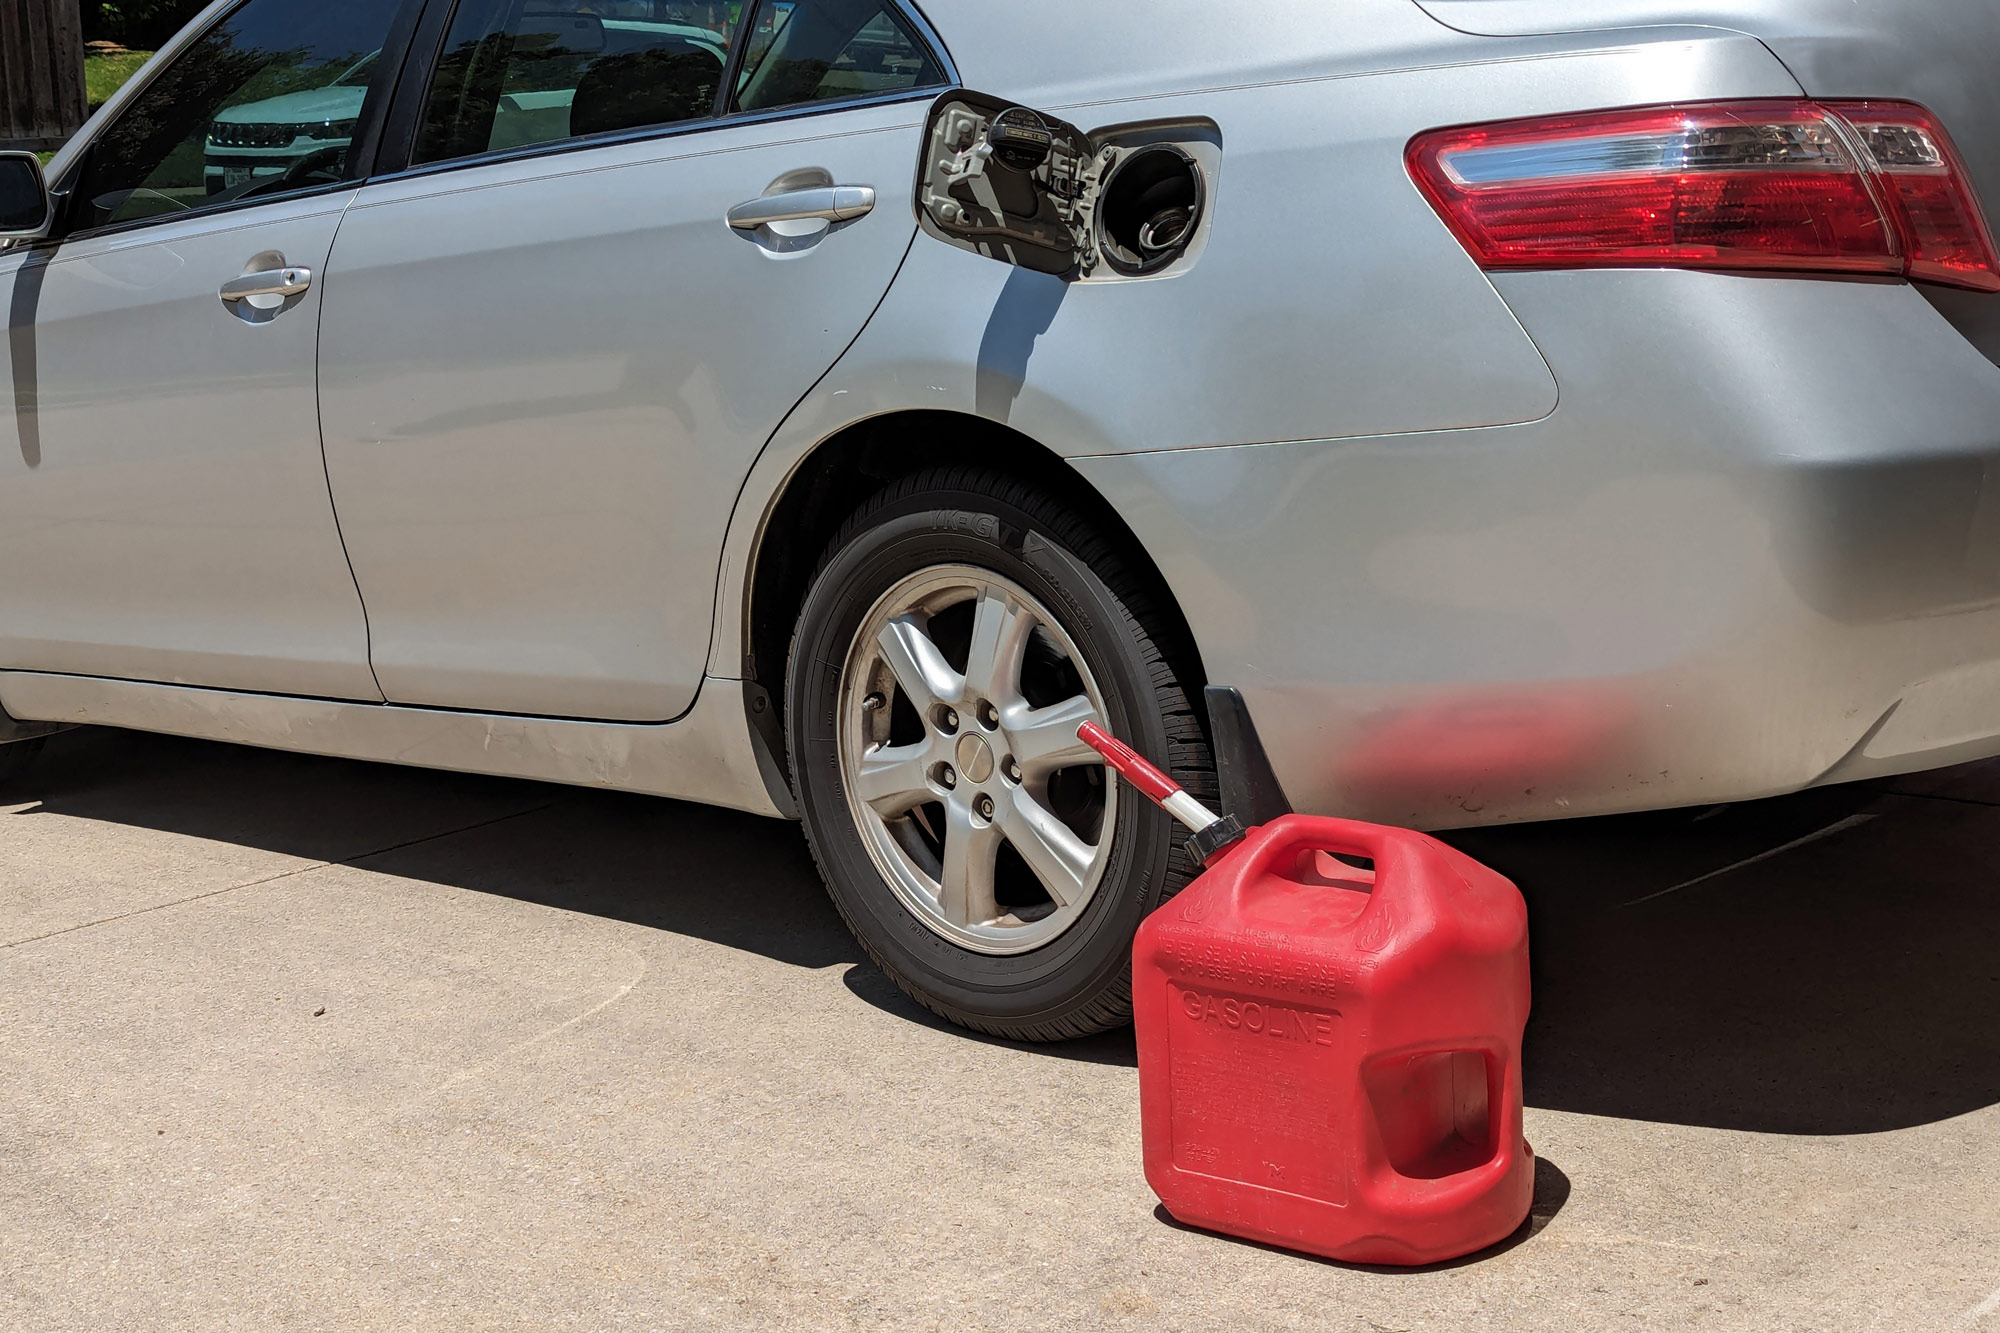 Red gas container sits next to a silver car with its fuel door open.